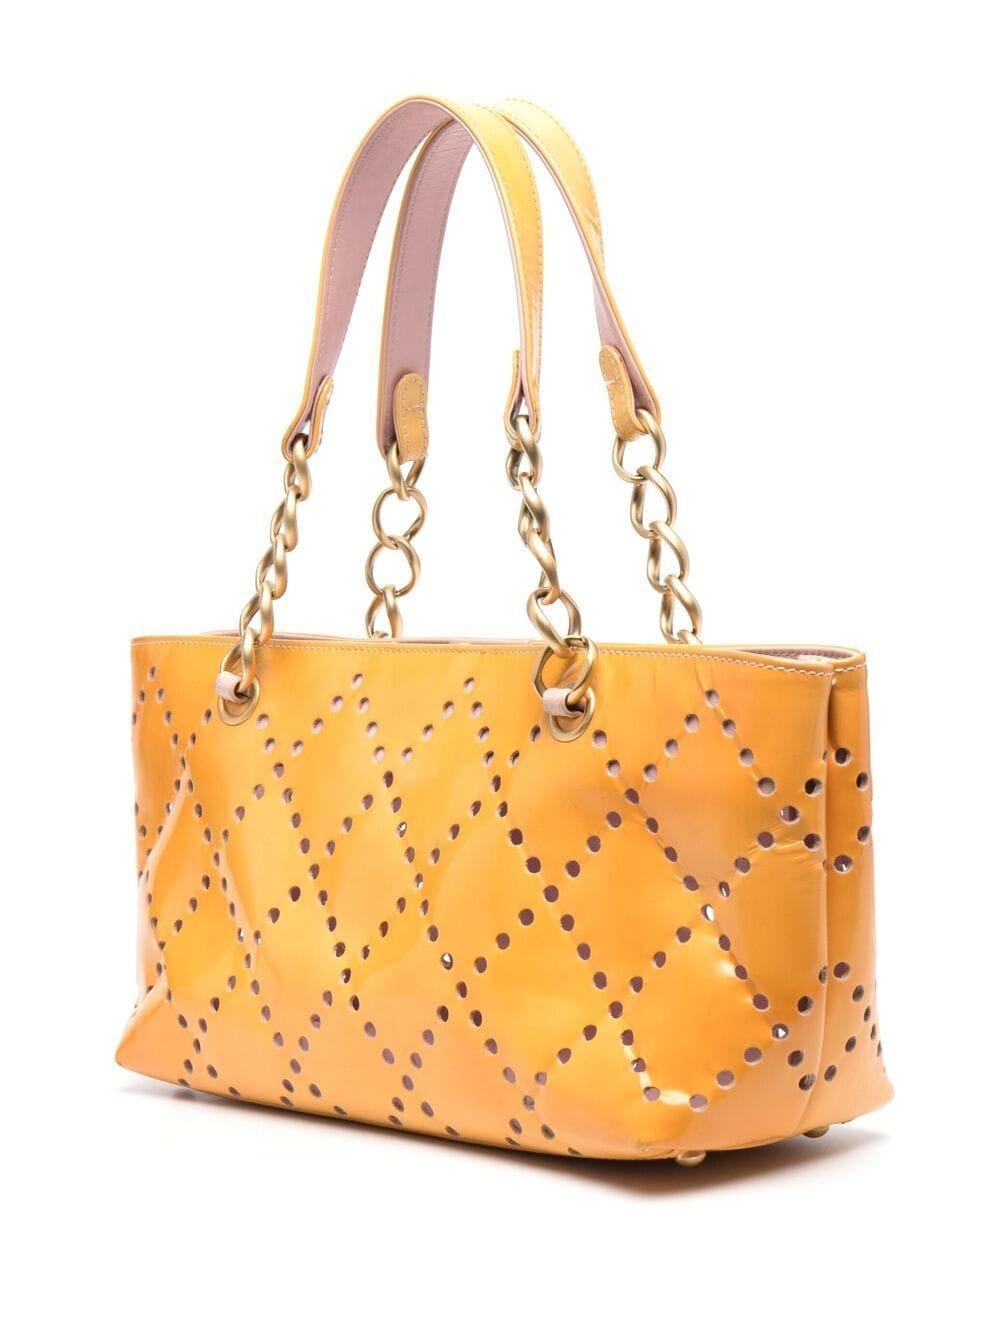 Chanel yellow banana leather tote bag featuring a perforated patent leather pattern, a front logo pattern, gold-tone hardware, an inside pink leather lining, a snap opening, an inside pocket, two leather and chain-link shoulder straps, signature